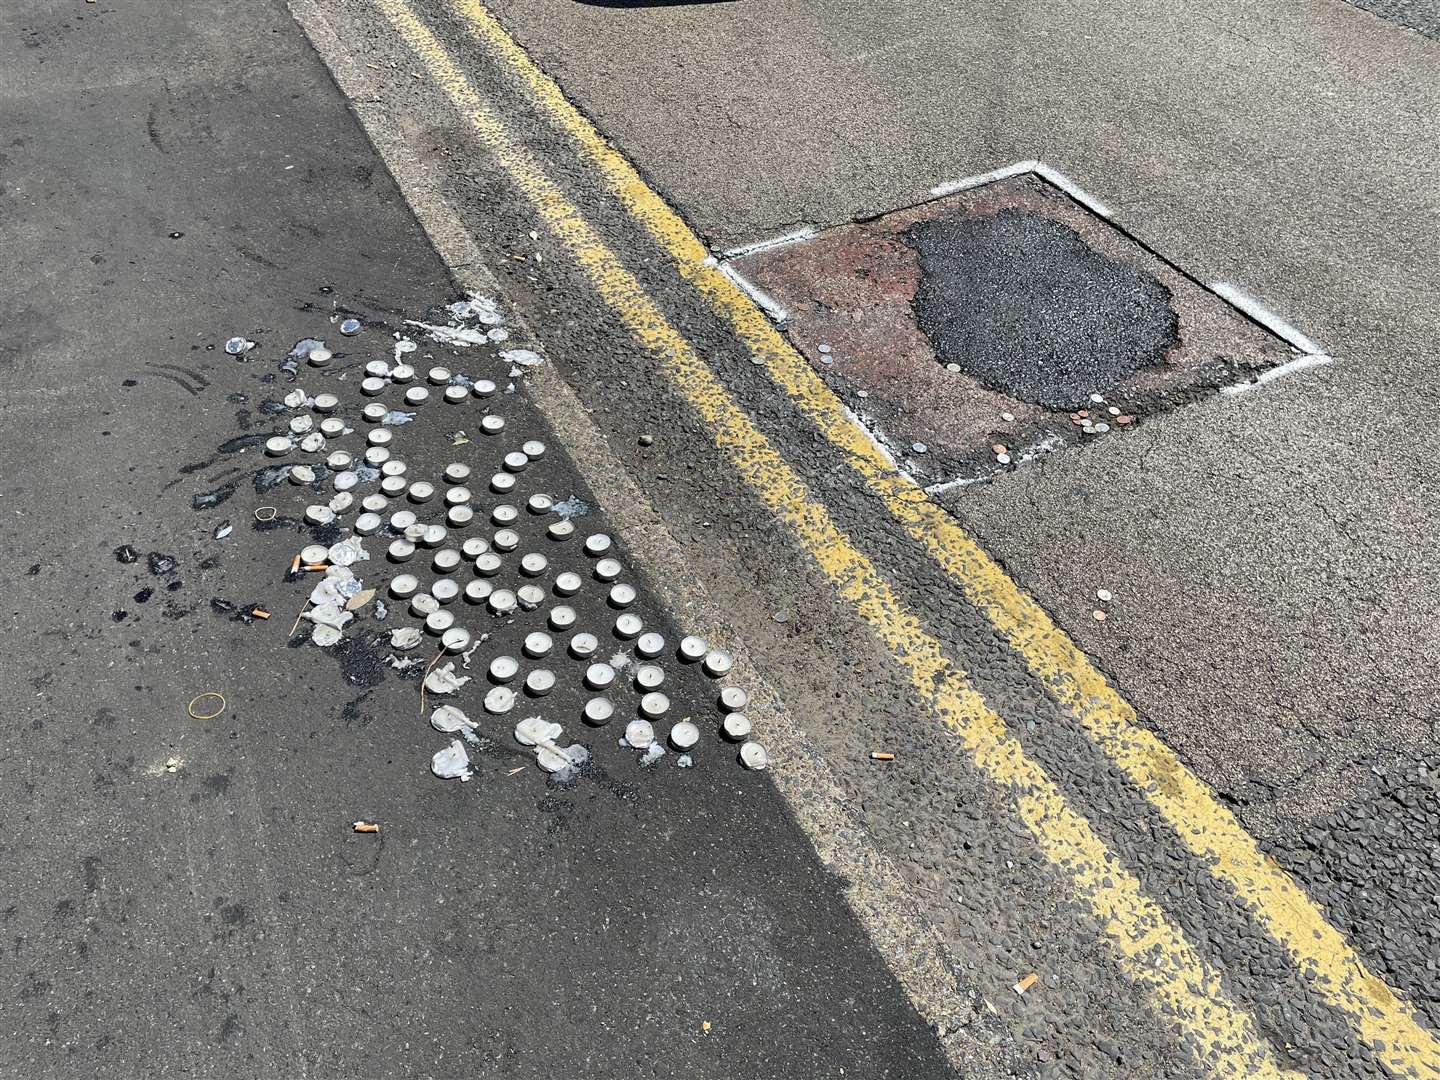 Candles were left by a recently-patched pothole close to the tributes